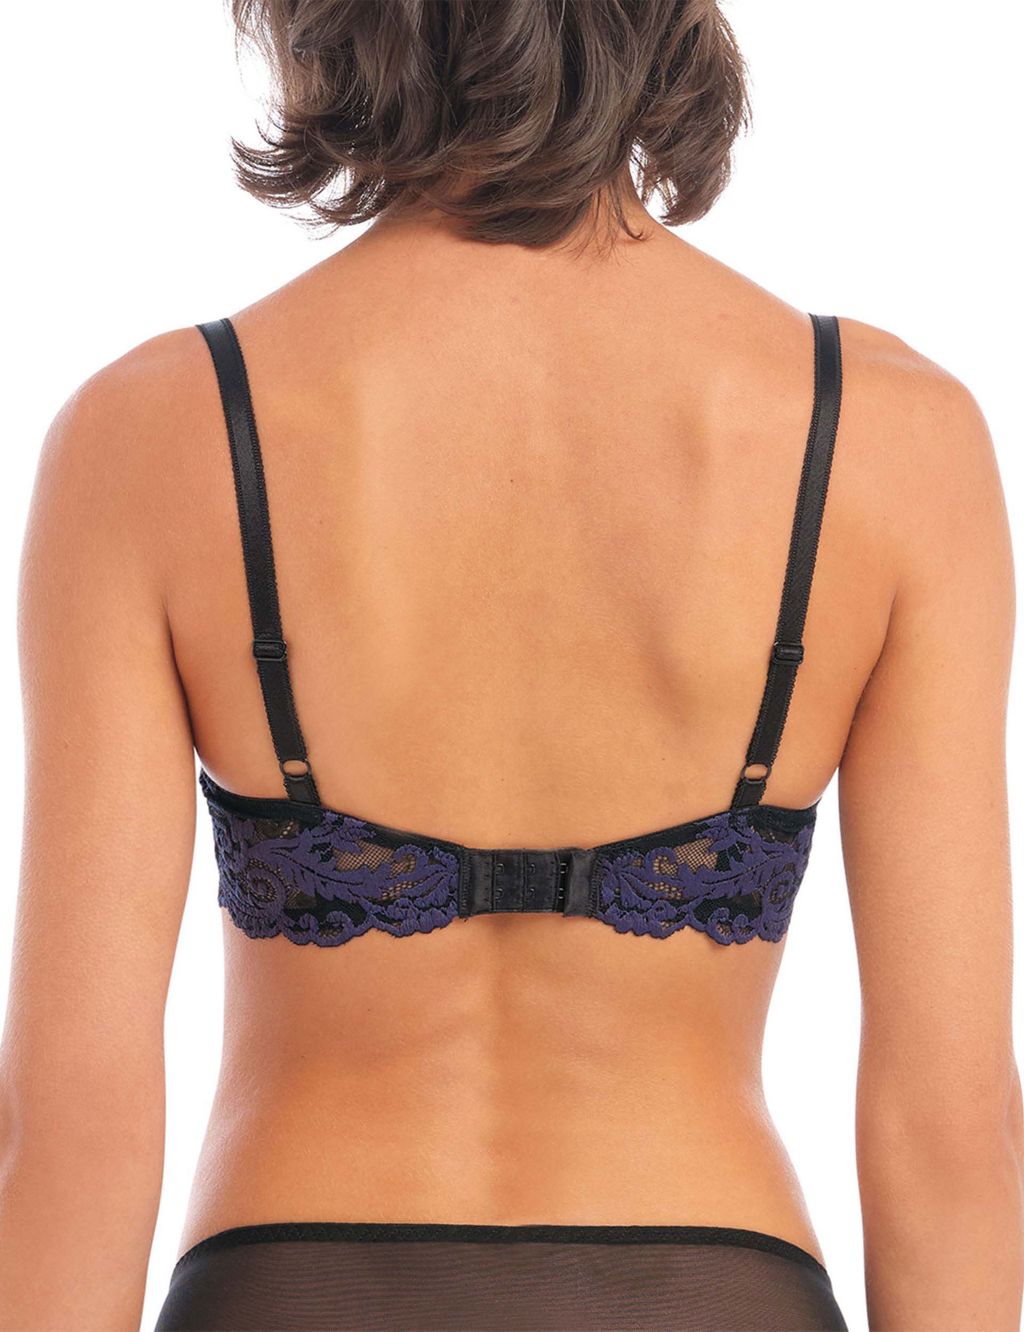 Instant Icon Floral Lace Wired Plunge Bra image 3